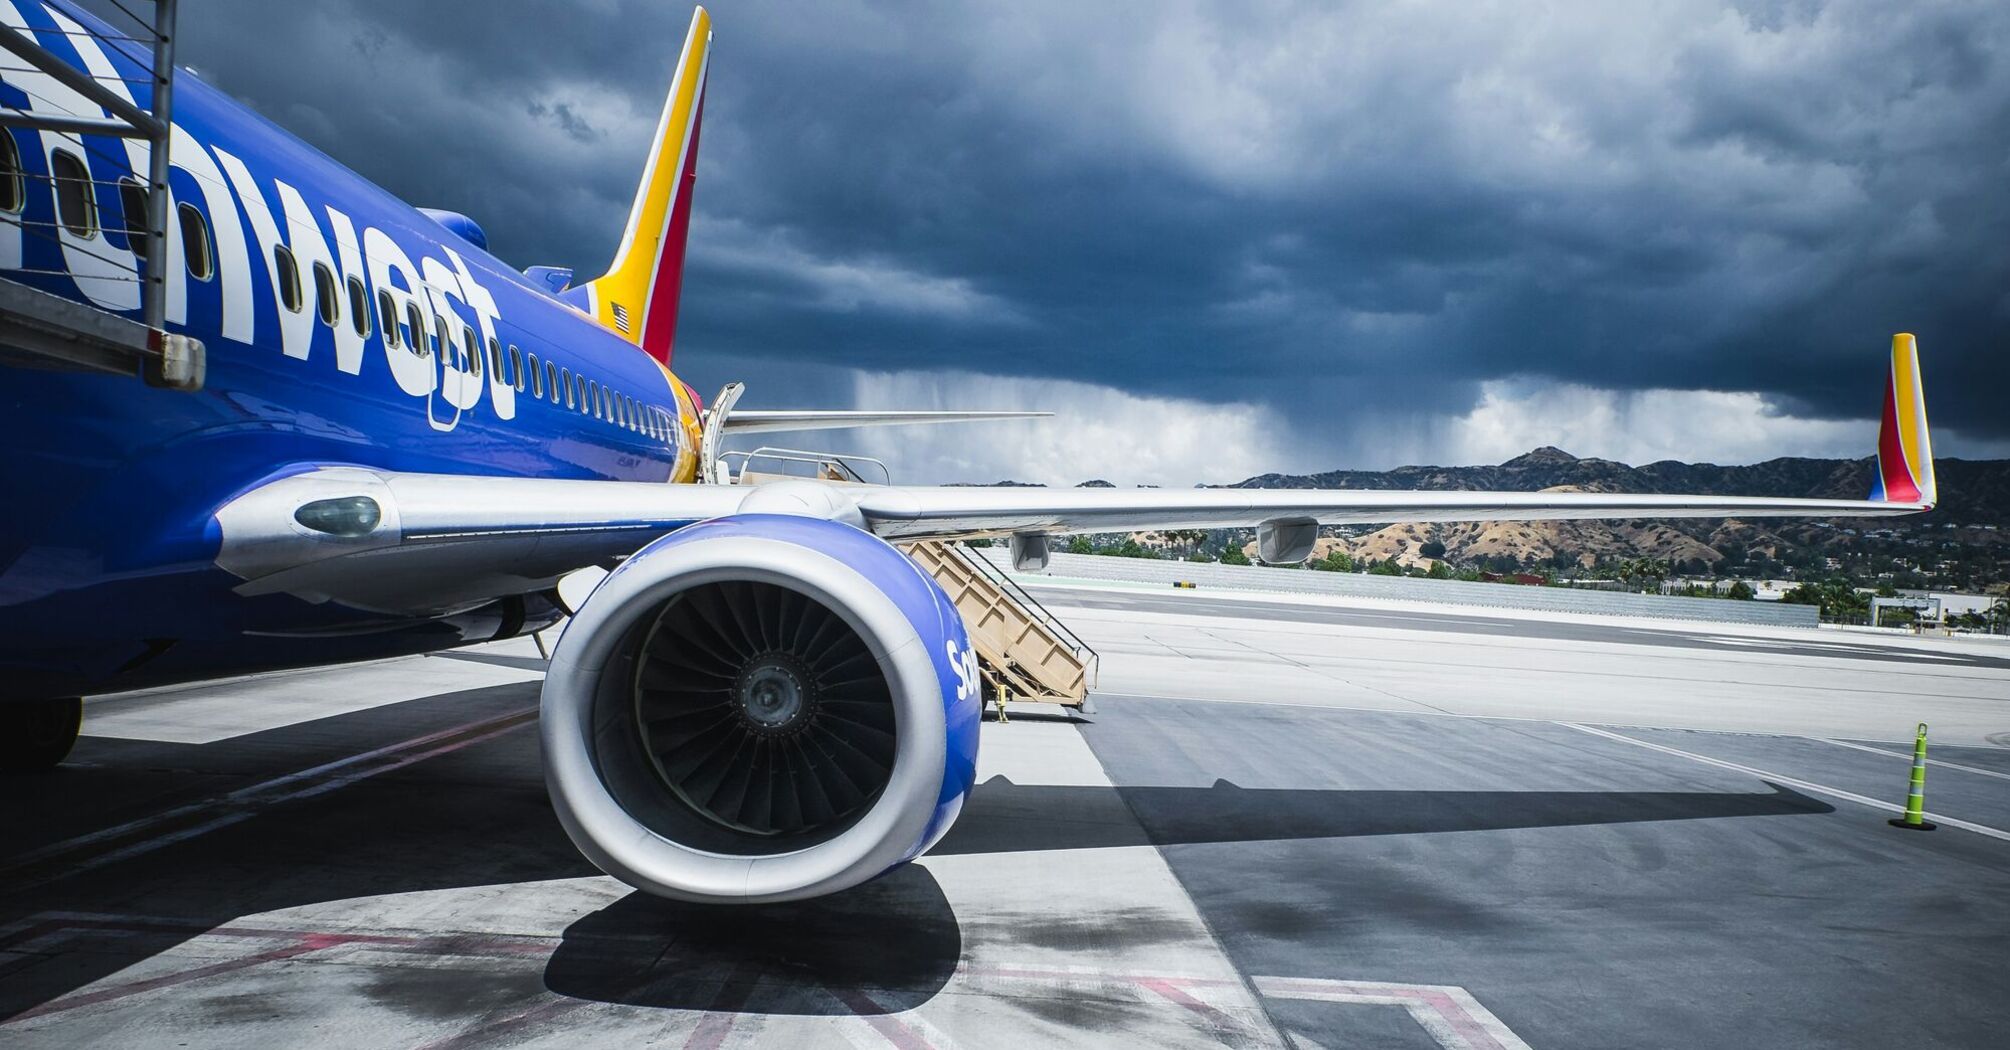 Southwest Airlines passenger plane on airport under gray cloudy sky